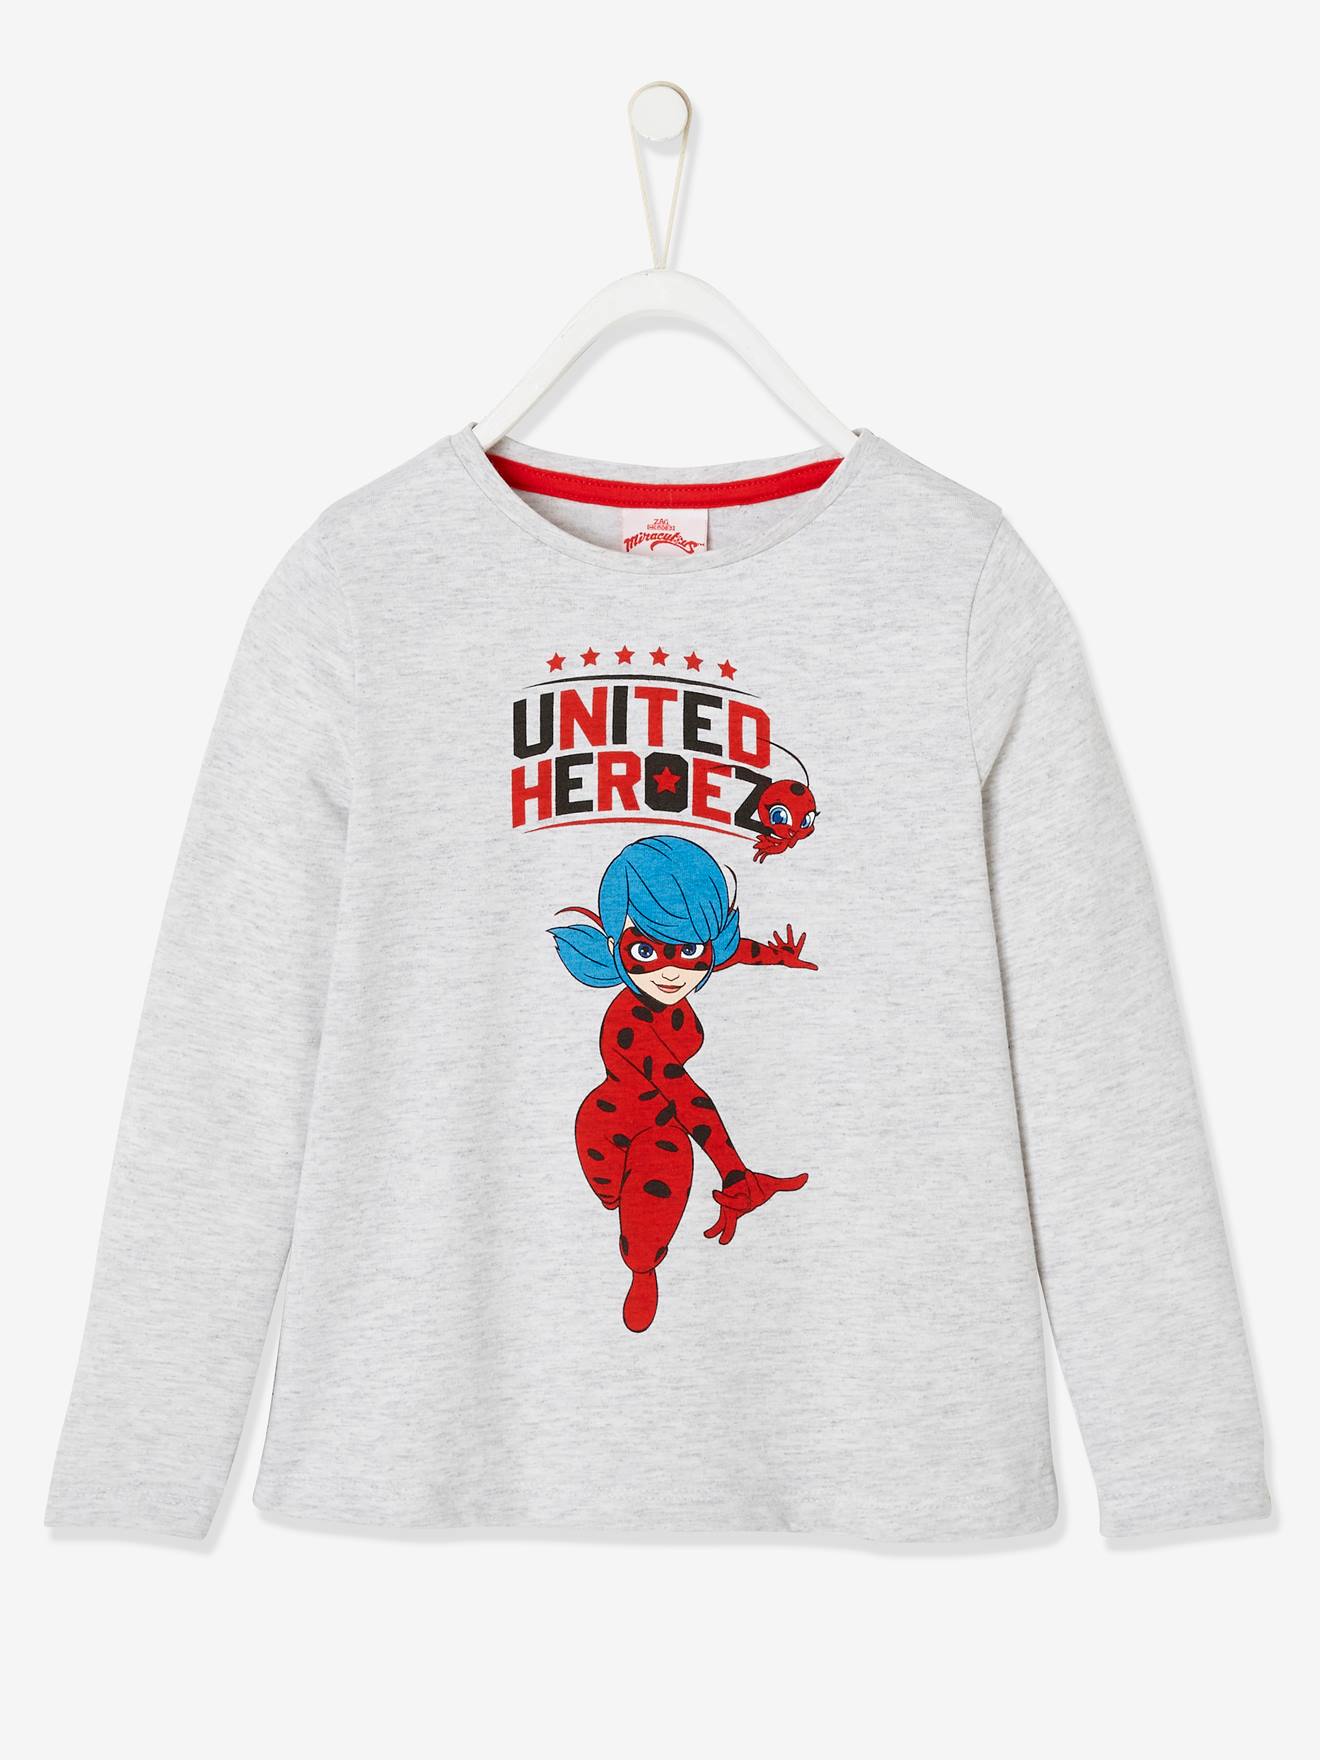 Long Sleeve Top, Miraculous: the Adventures of Ladybug, for Girls light grey